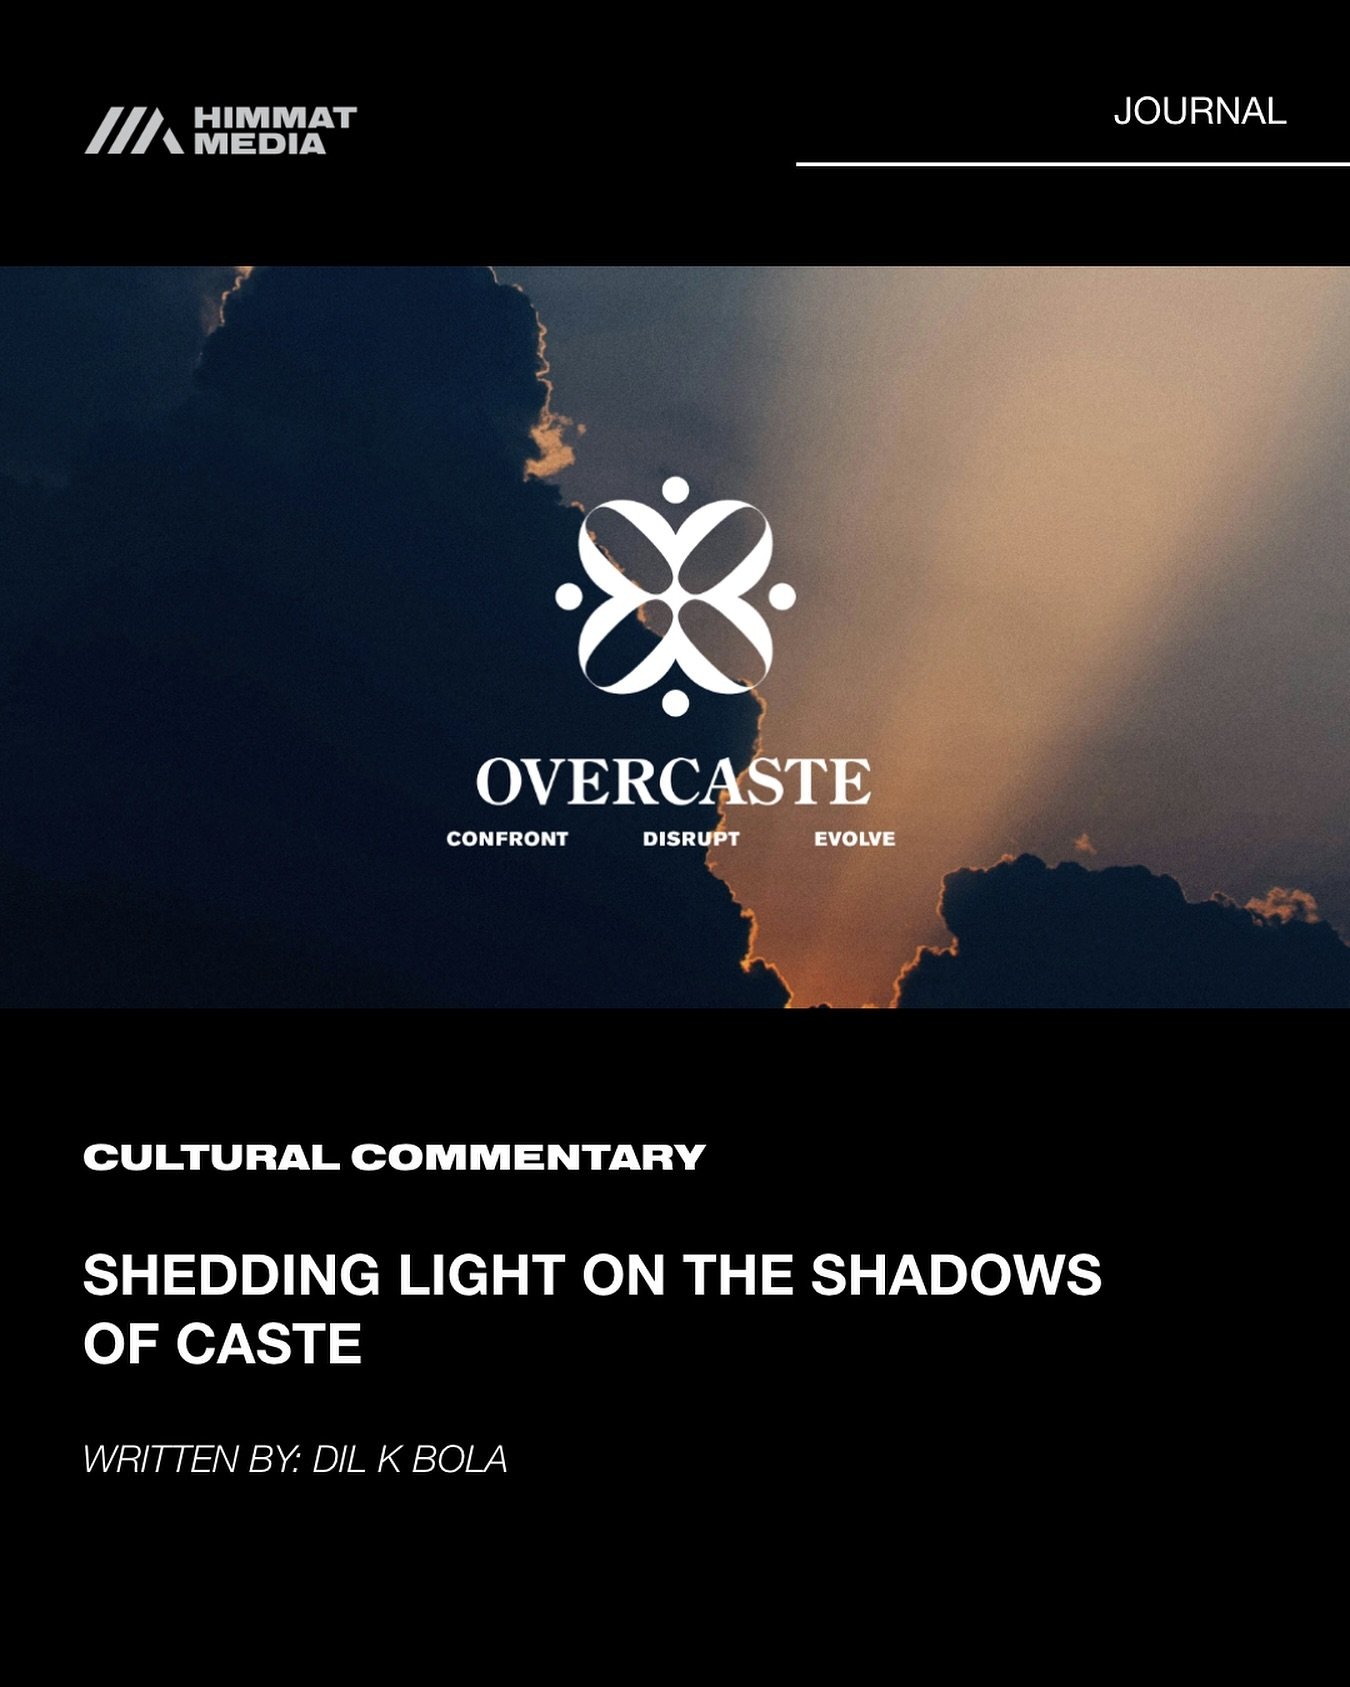 NEWEST ARTICLE: Shedding Light on the Shadows of Caste

Dive into the thought-provoking exploration of identity and inequality rooted in Poetic Justice Foundation&rsquo;s exhibit, Overcaste, with our newest resident writer, Dil K Bola. 

Harnessing &